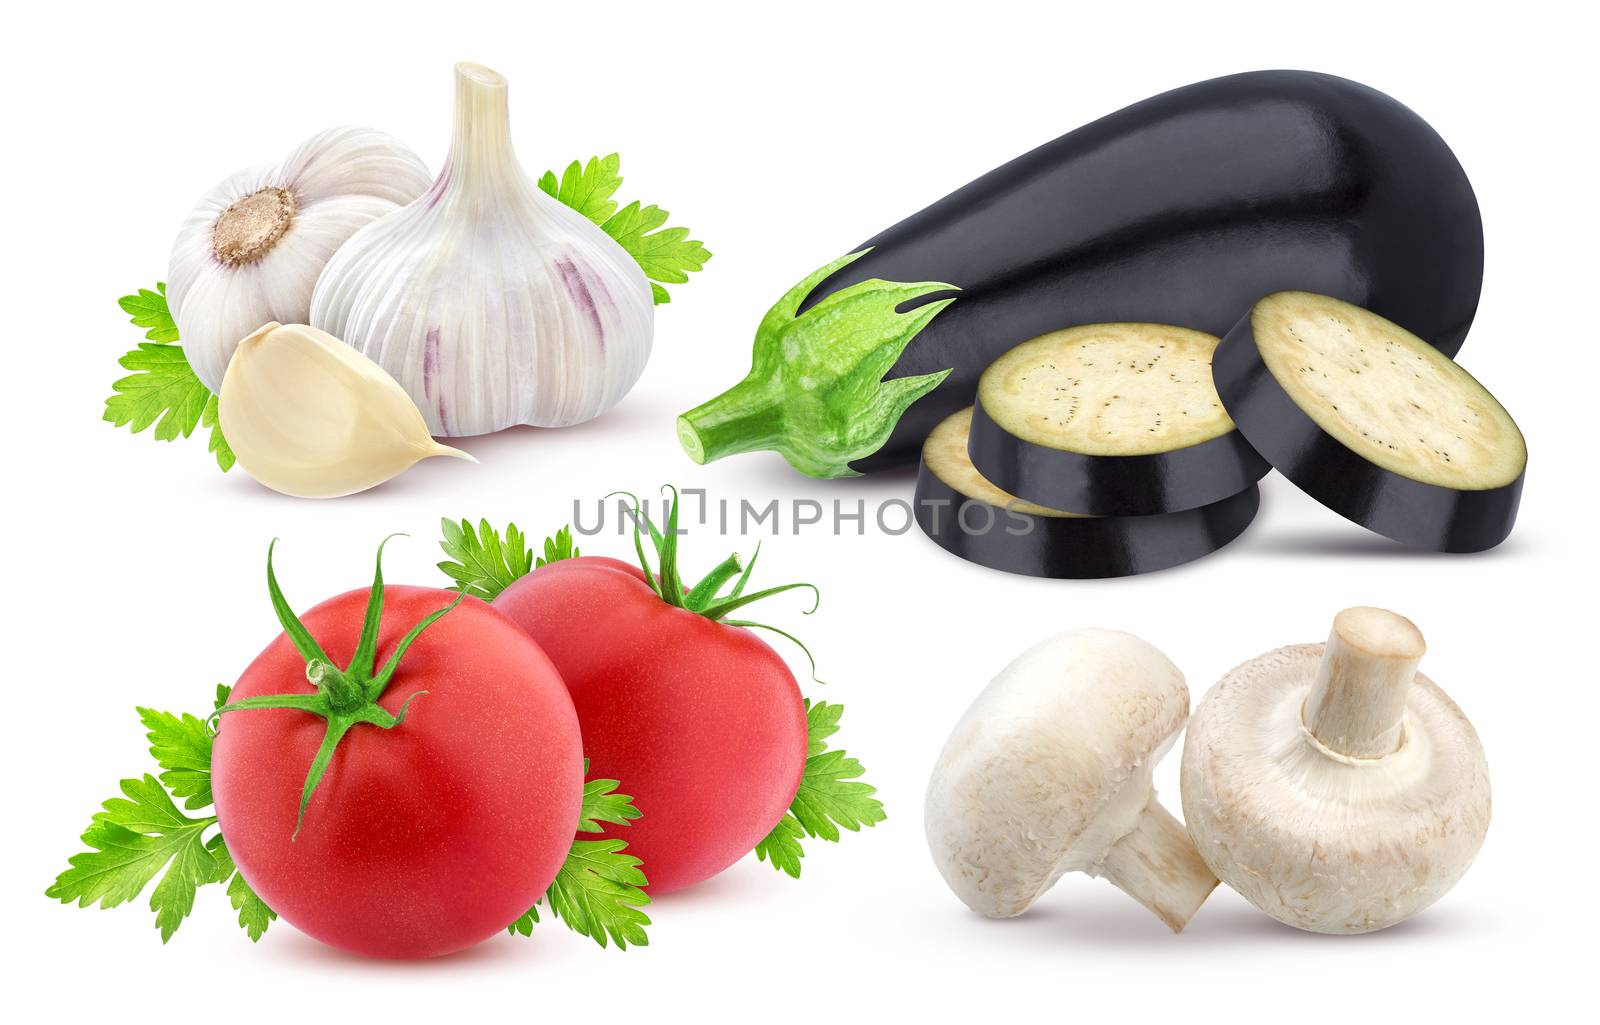 Fresh vegetables isolated. Eggplant, tomato and garlic isolated on white background with clipping path